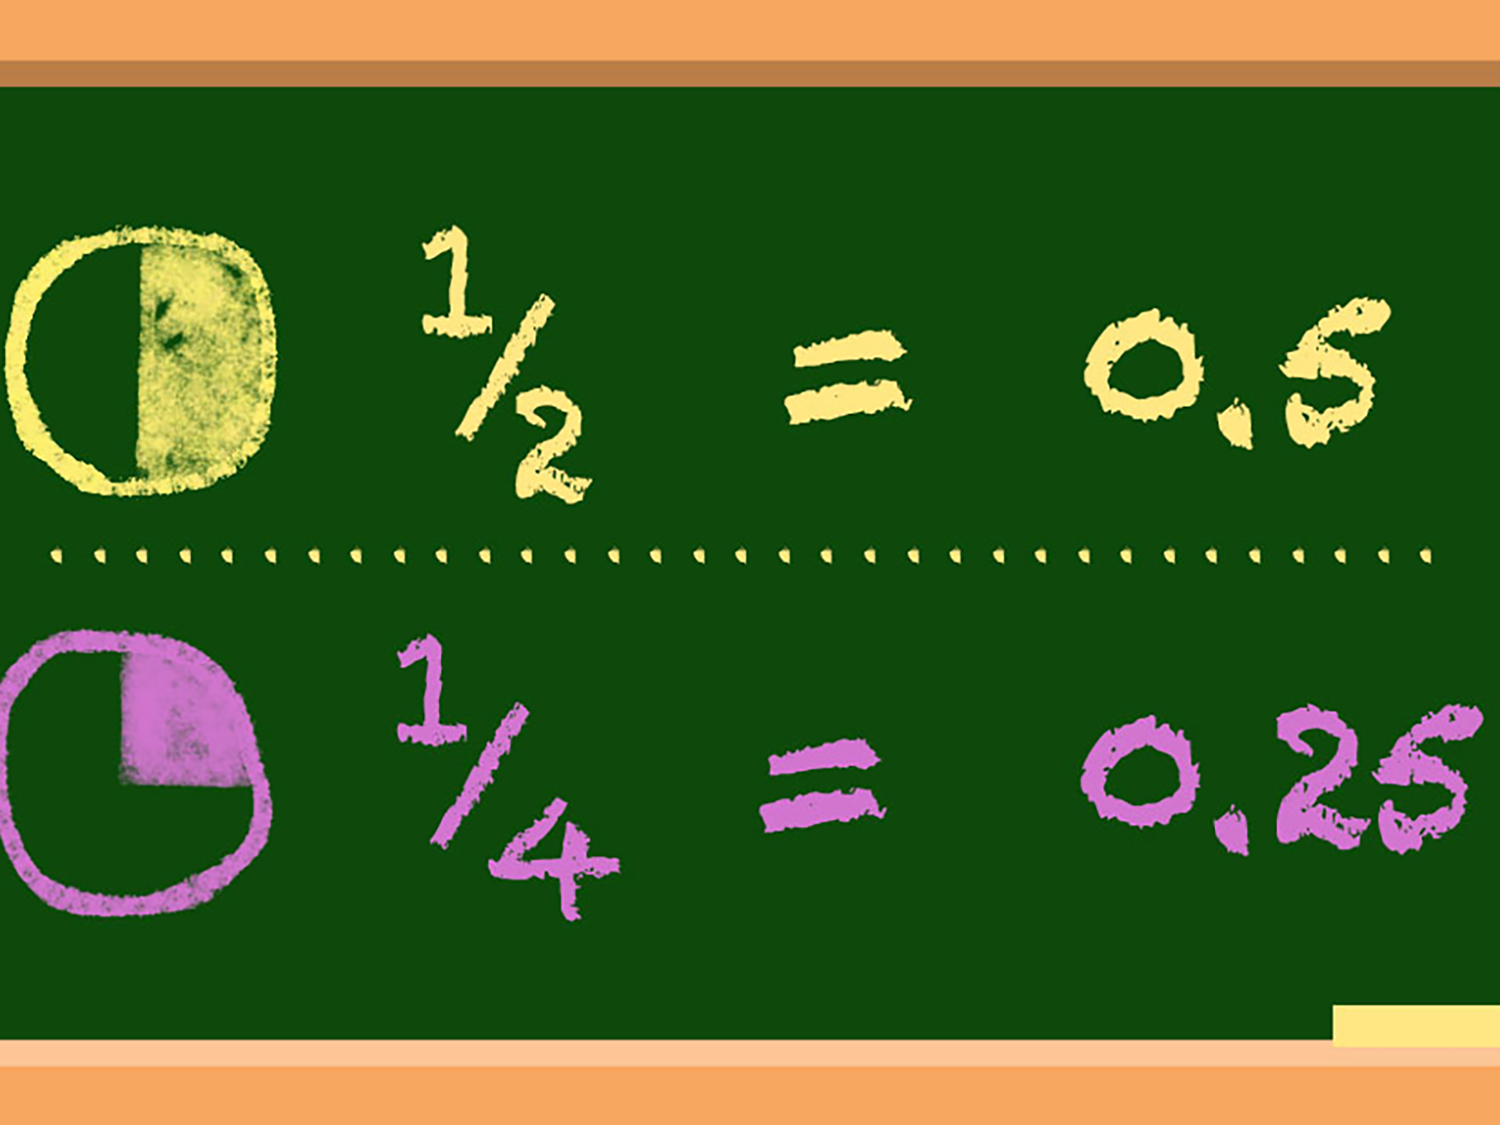 fraction-to-decimal-conversions-with-a-fun-math-printable